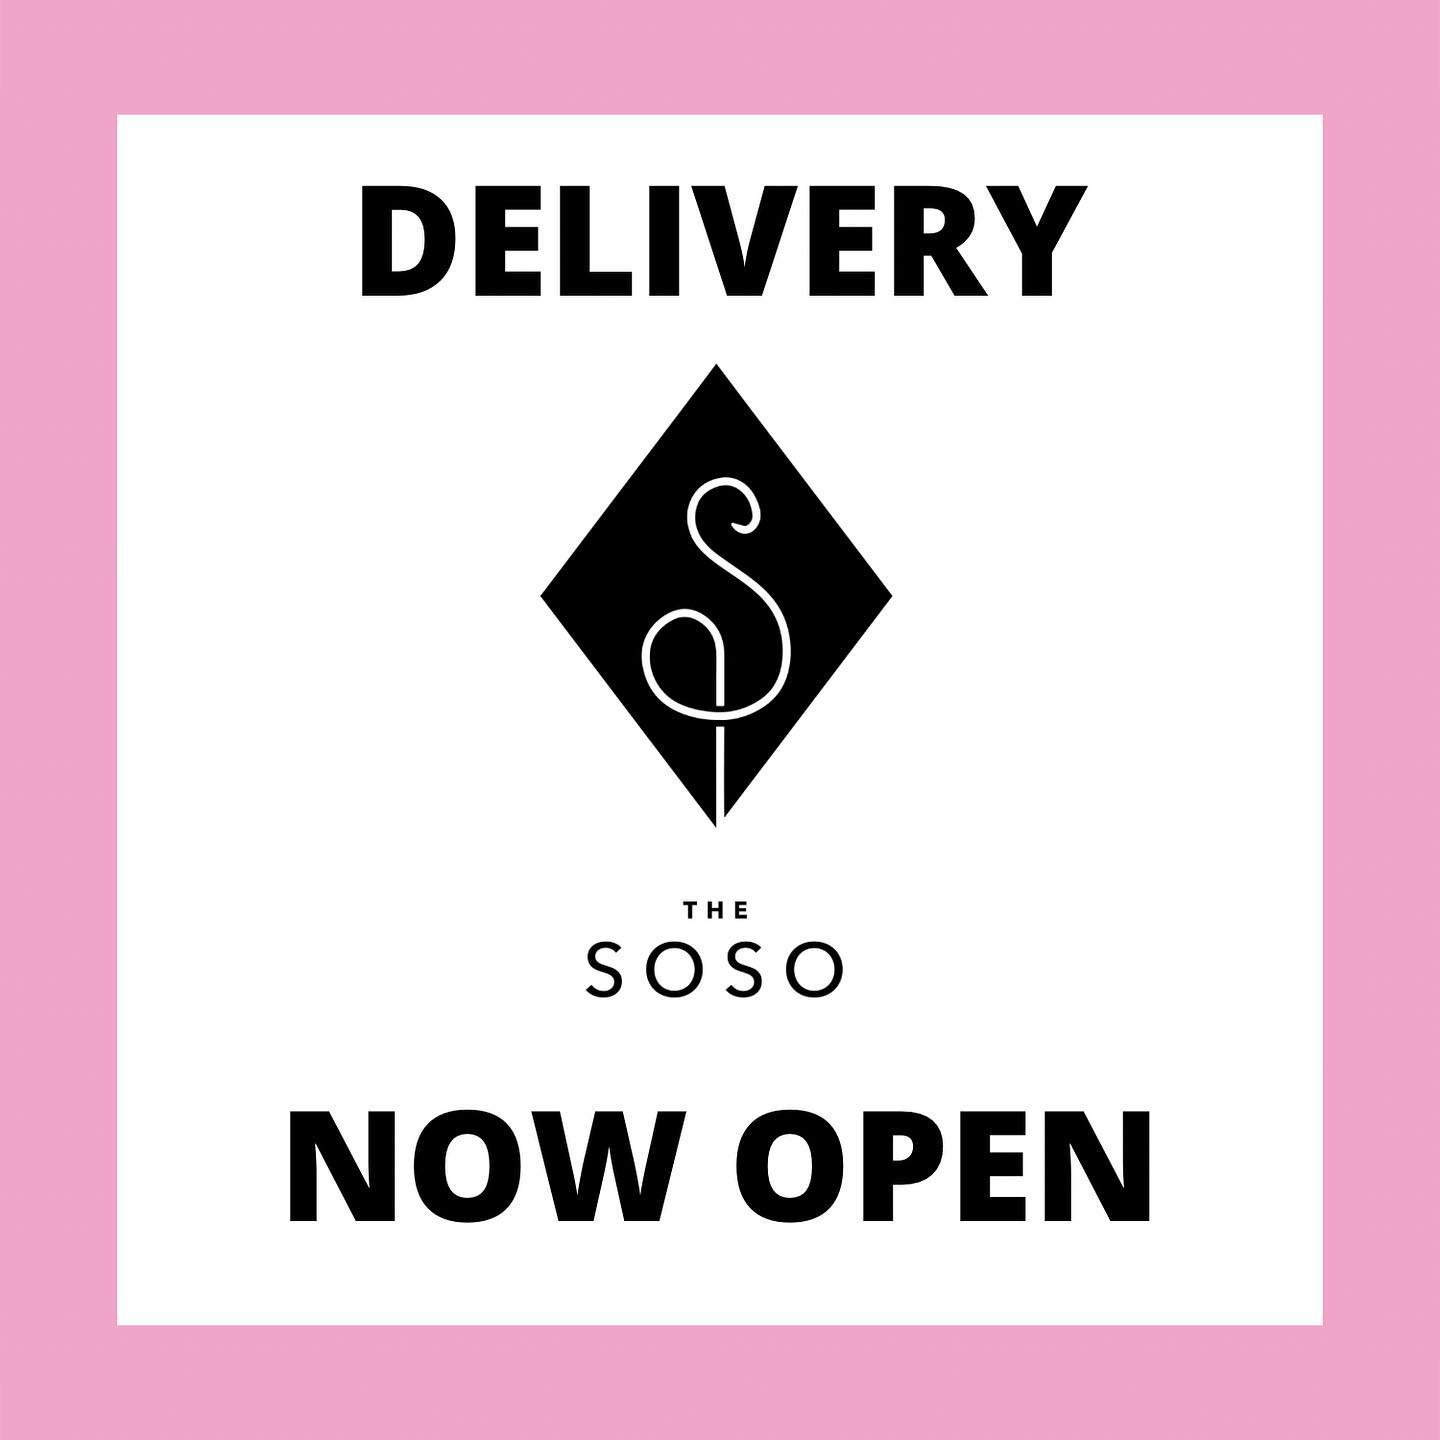 Delivery now available through our website thesosowpb.com! See you at your doorstep!